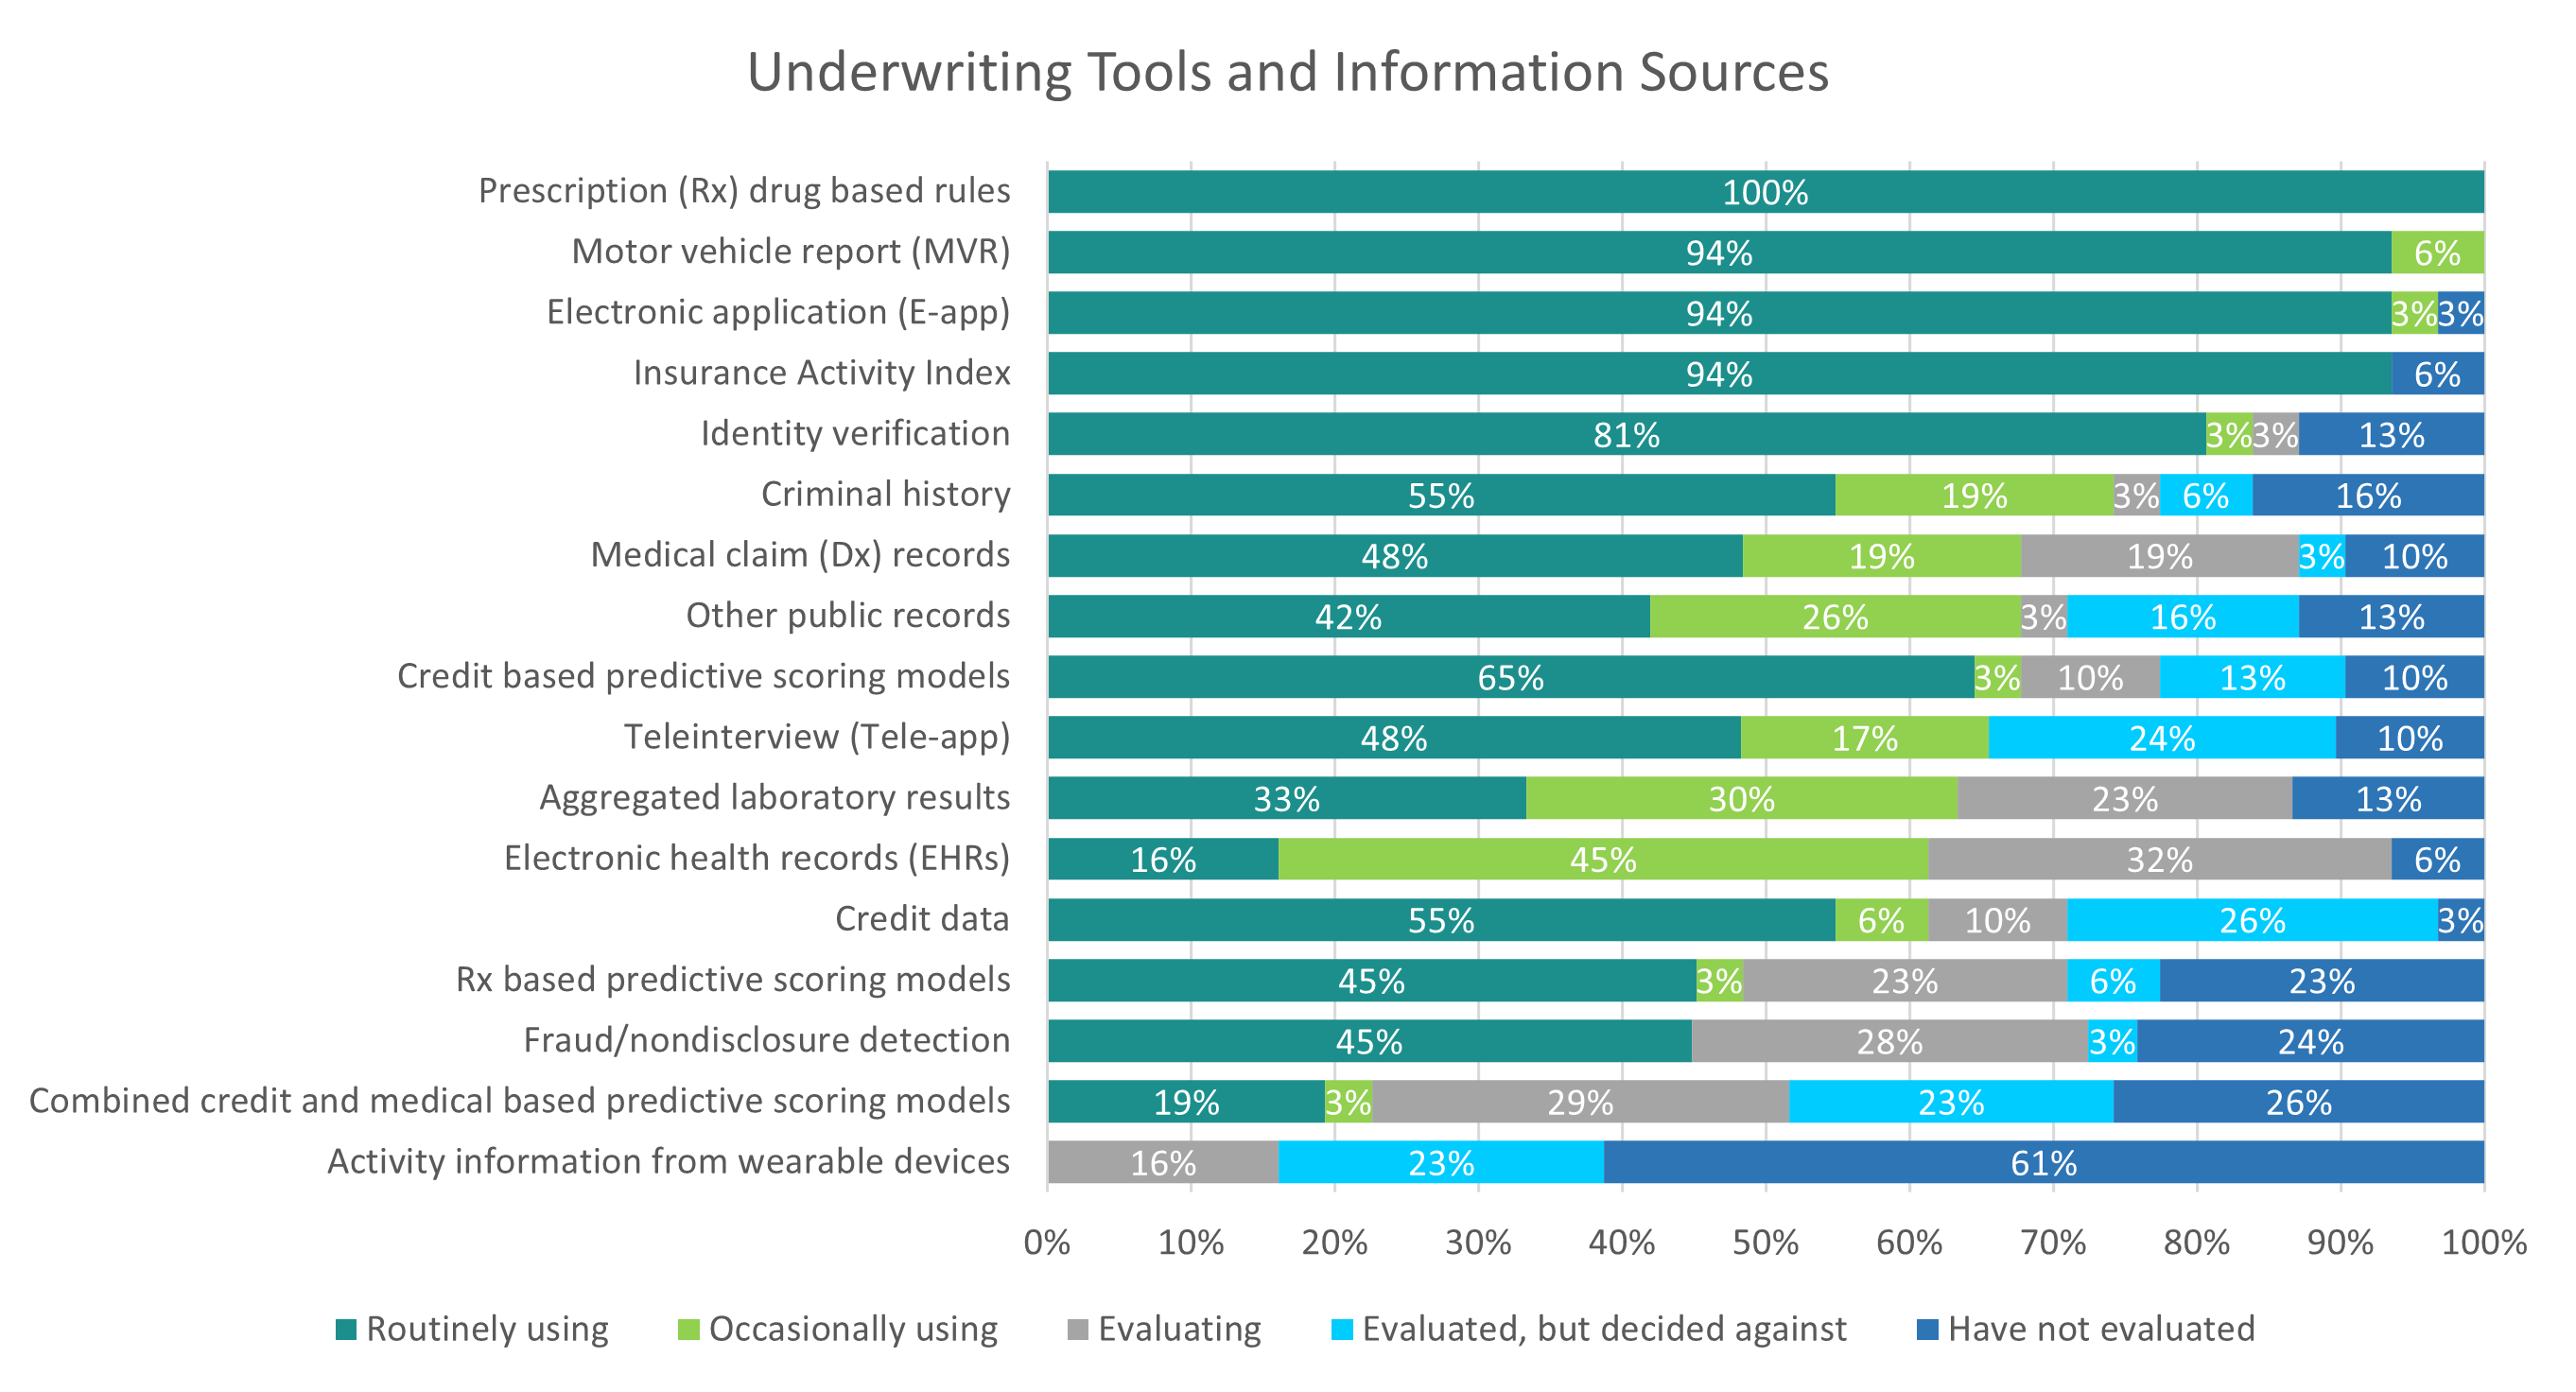 Figure 5: Underwriting Tools and Information Sources used in AUW